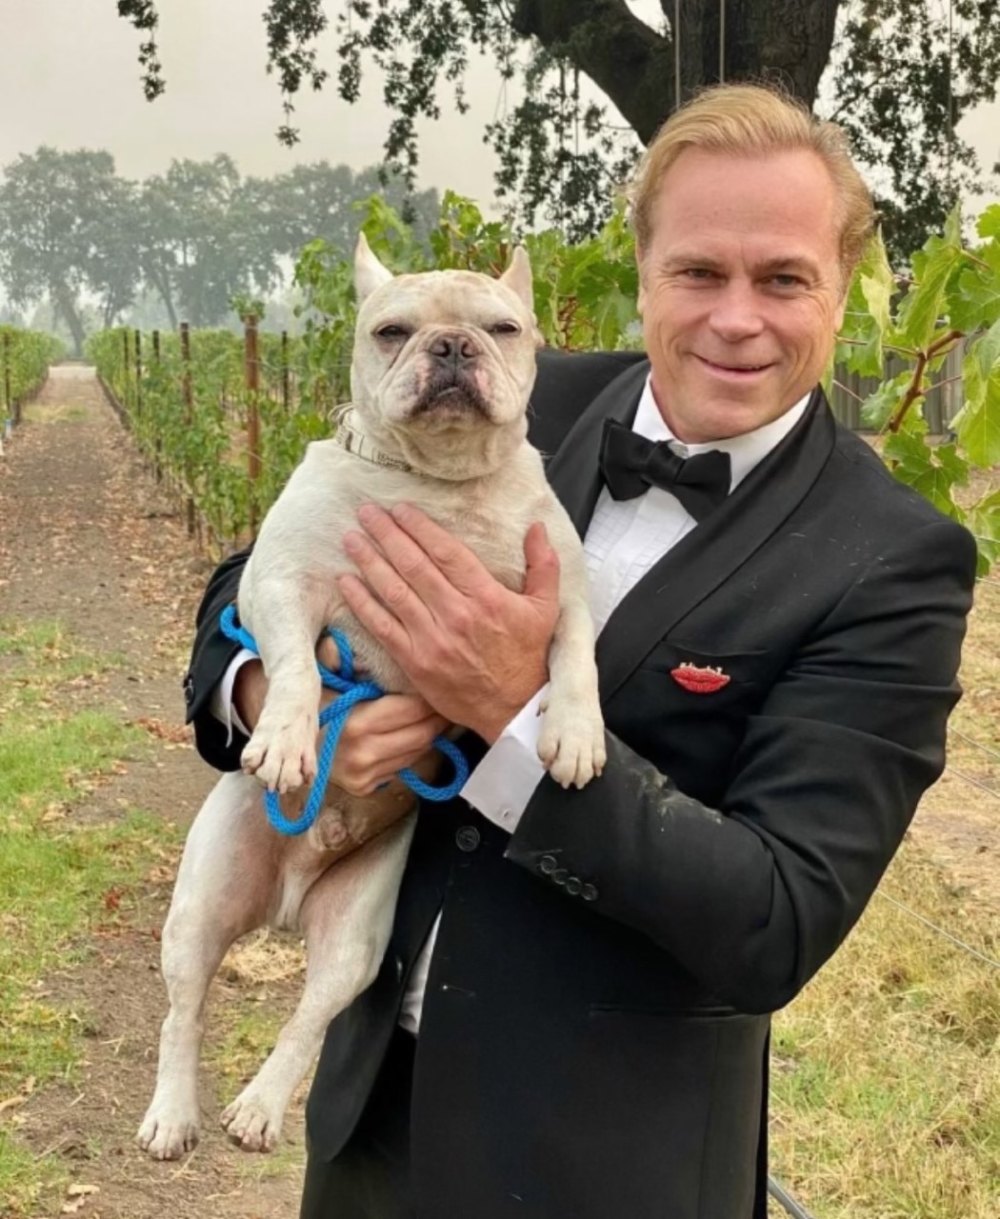 GrapeStars Honors Jean-Charles Boisset, The Driving Force Behind A New ...